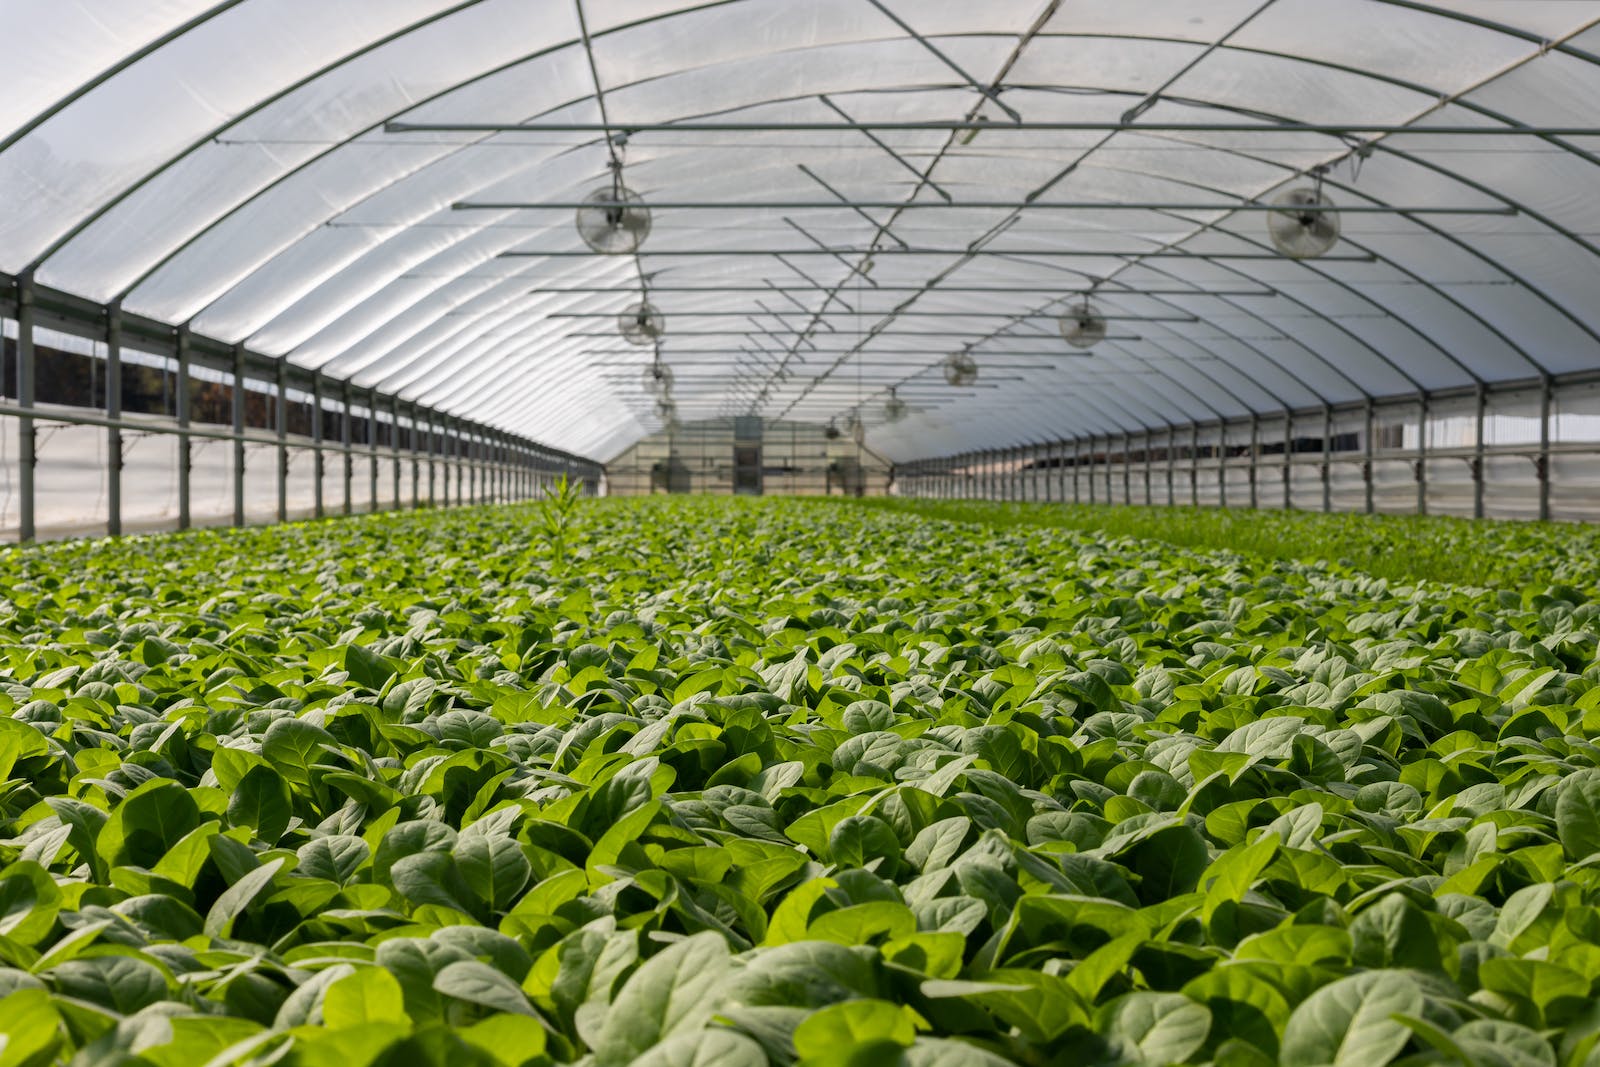 Field of Plants in Greenhouse, Agriculture & Farming Industry